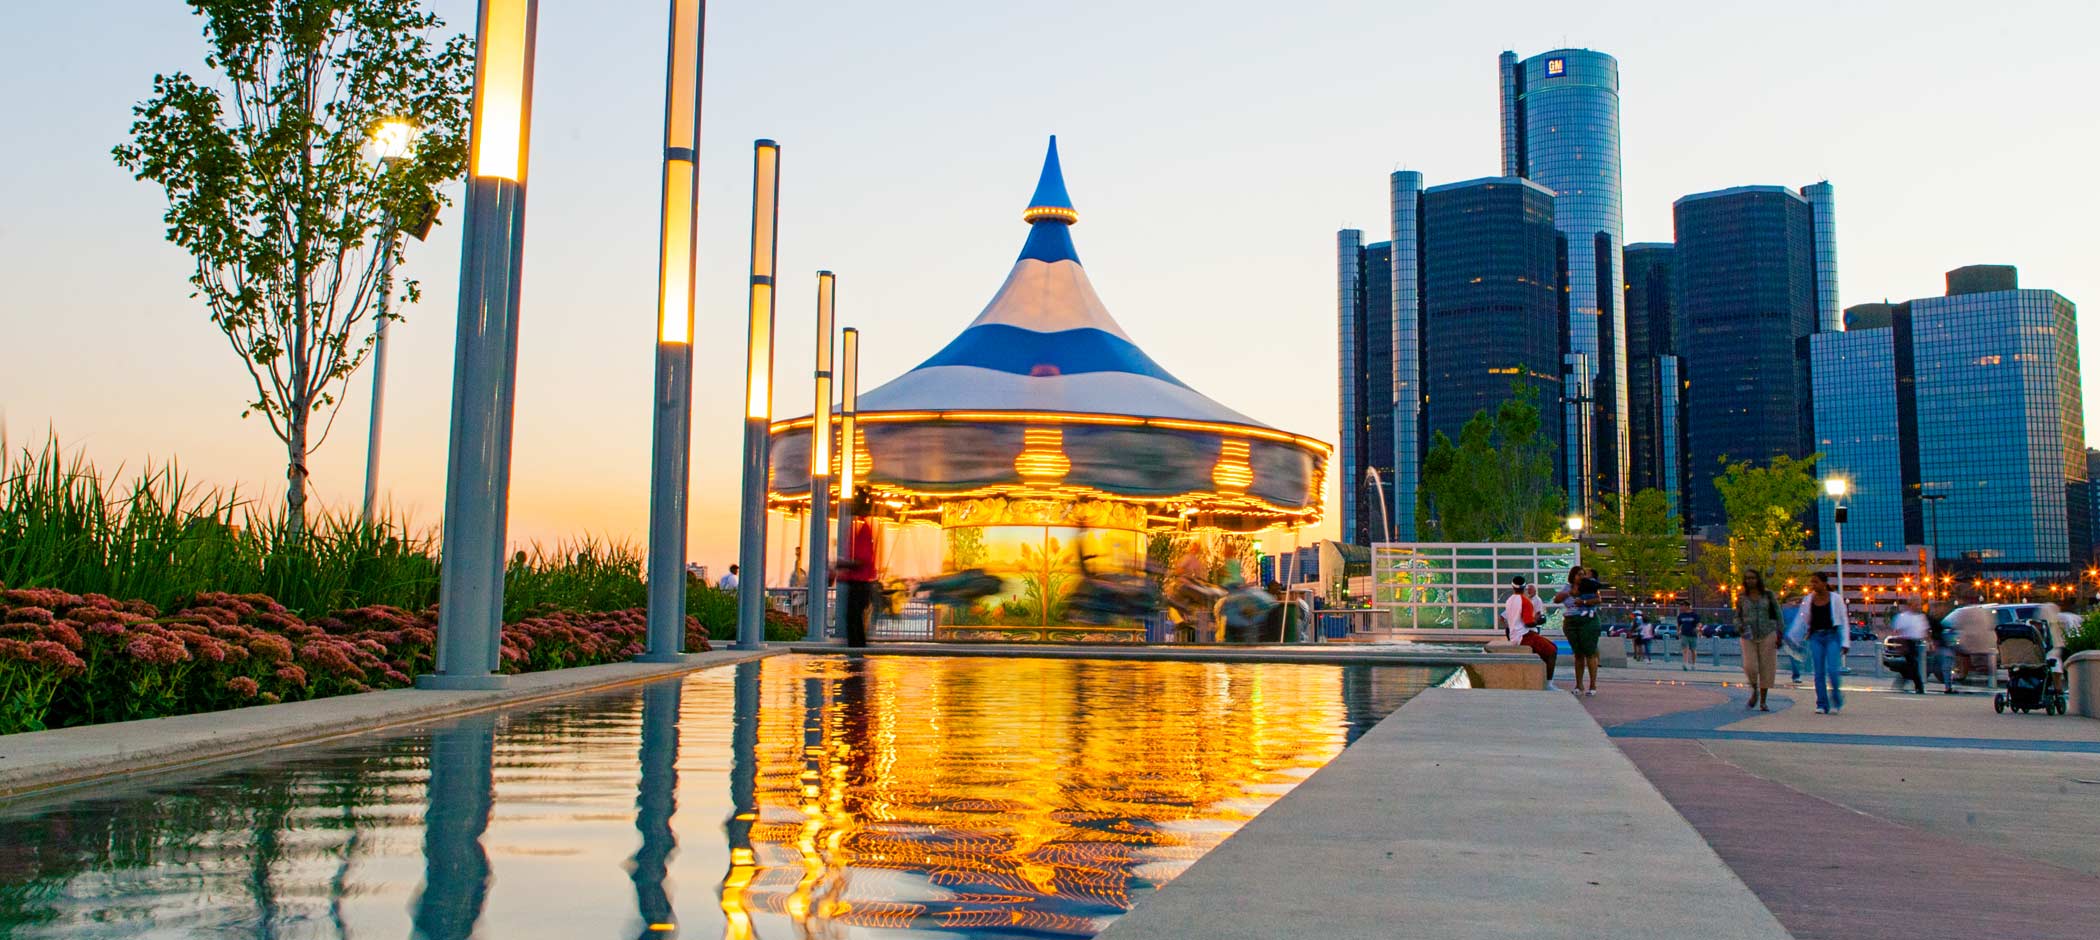 11 Best Places to Catch the Sunset In Metro Detroit; Inside and Outside